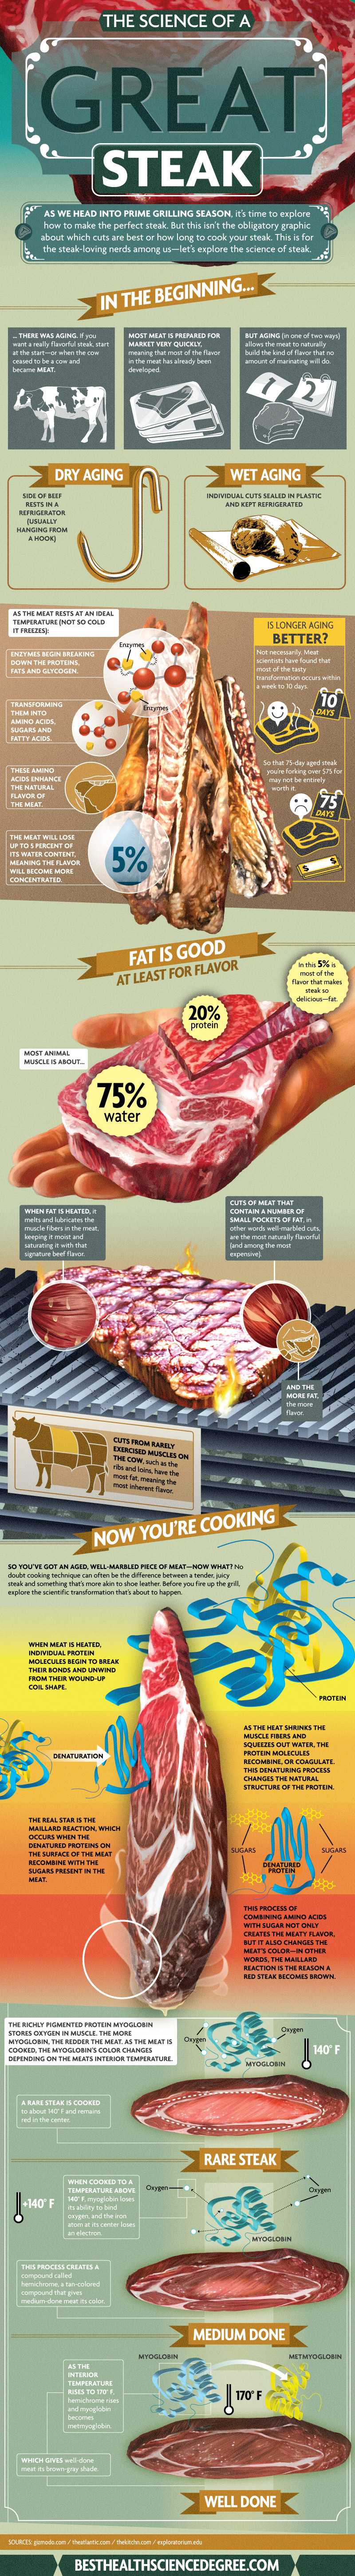 The Science of a Great Steak